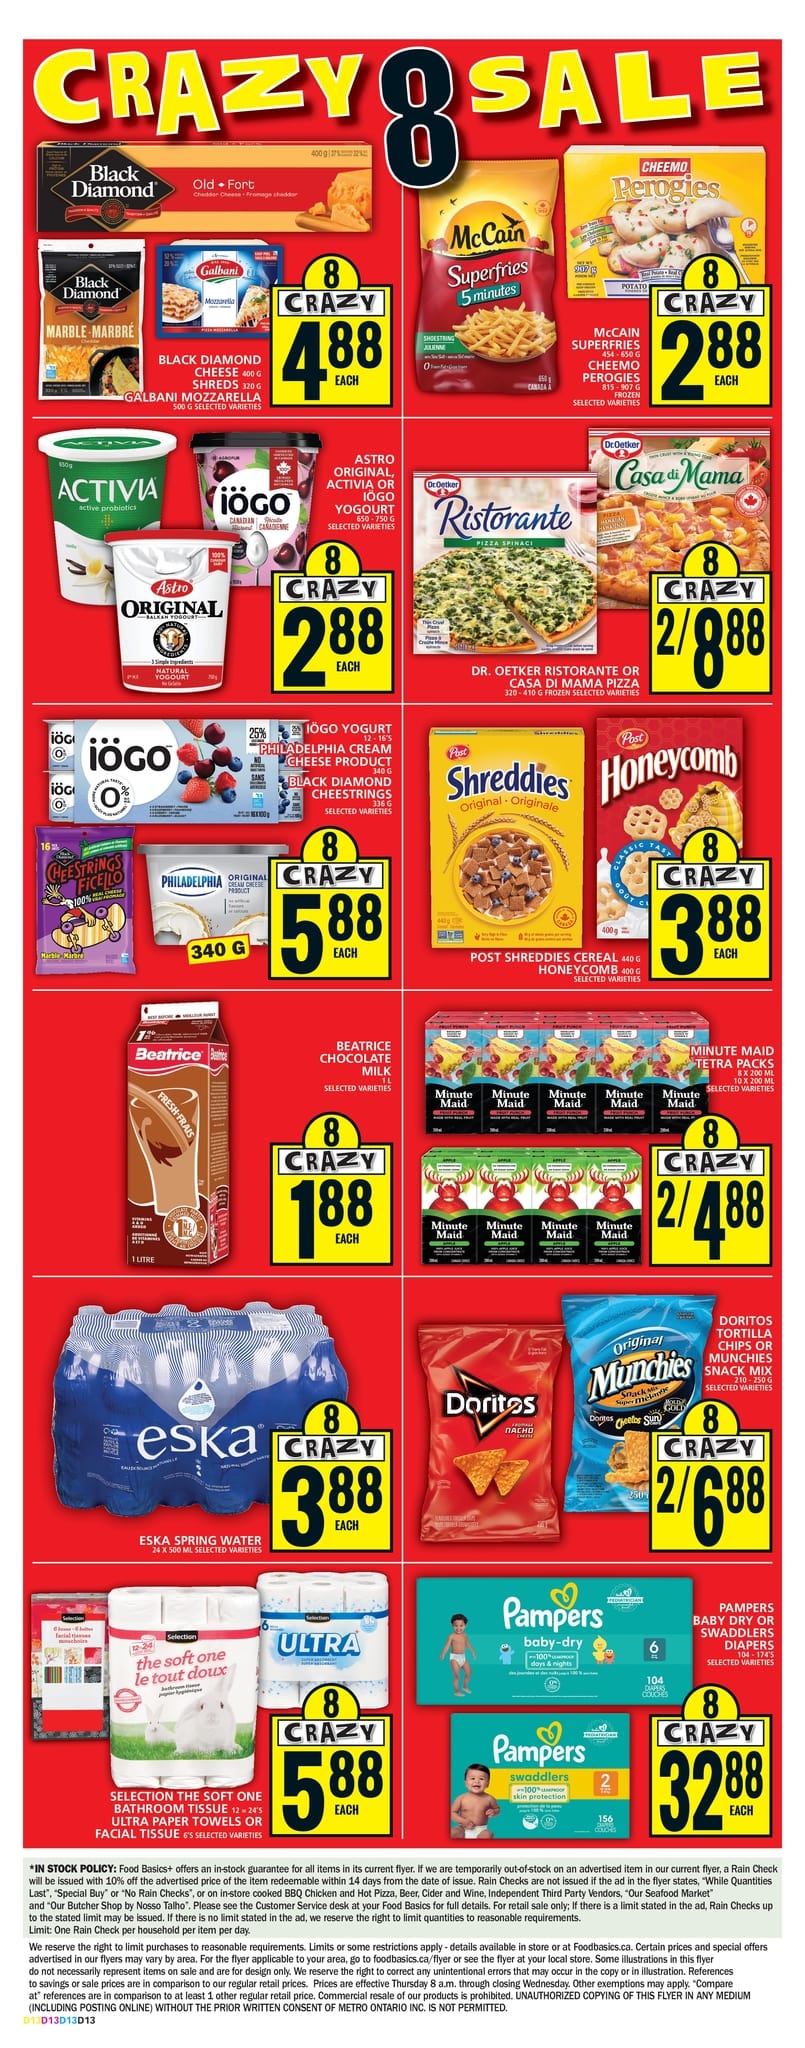 Food Basics - Weekly Flyer Specials - Page 2